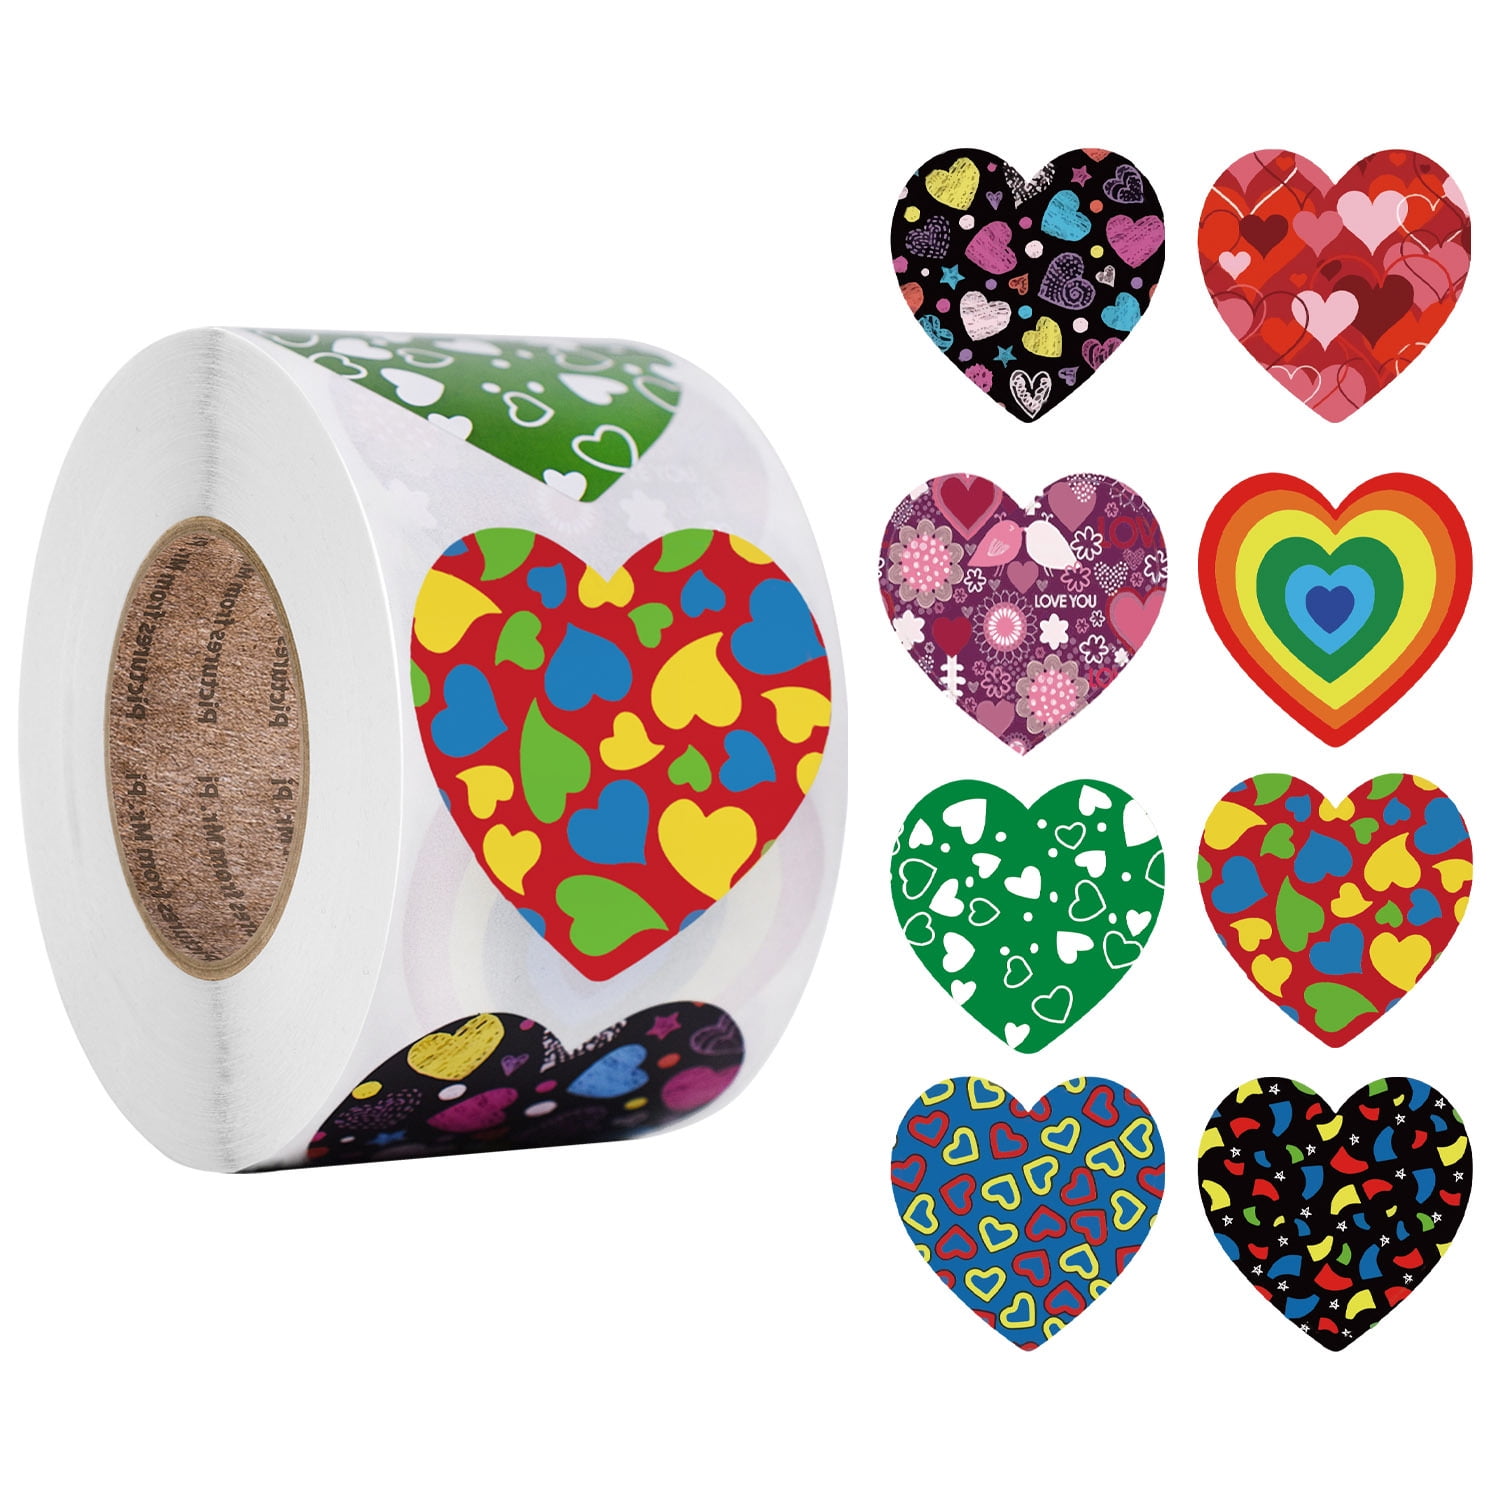 8 Sheet Heart Shaped Stickers Heart Sticky Labels Valentines Day Labels Self-Adhesive Heart Shape Paper for Craft Baking DIY Envelopes Wedding Invitations Gift Bags 